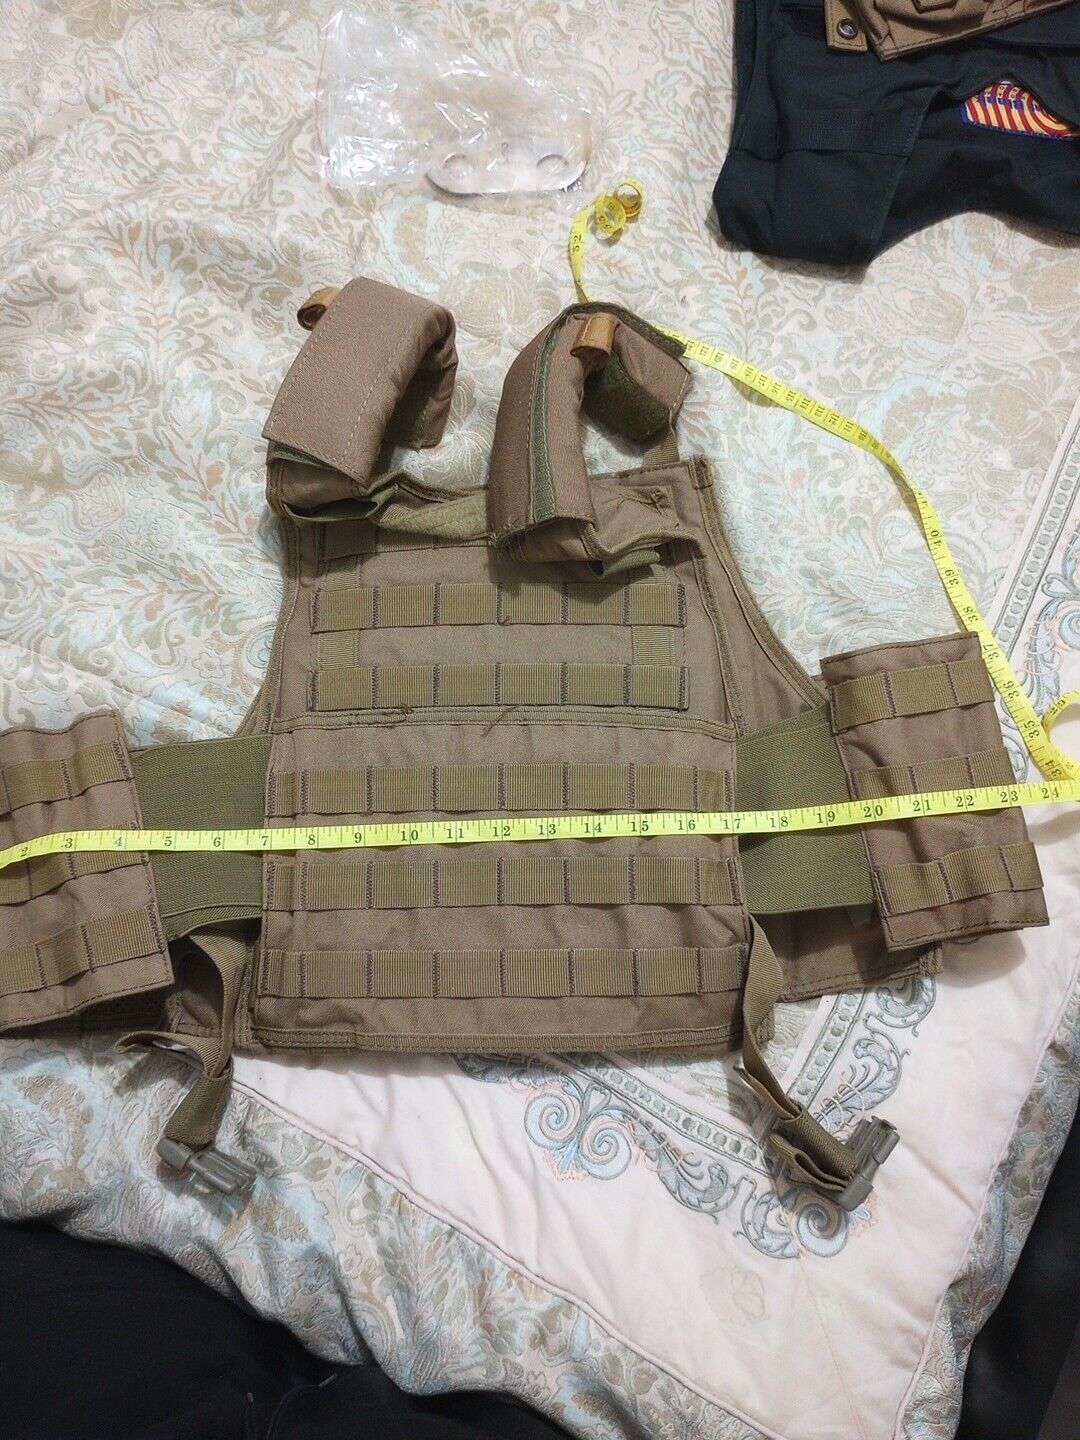 Military bullet proof vest with plates